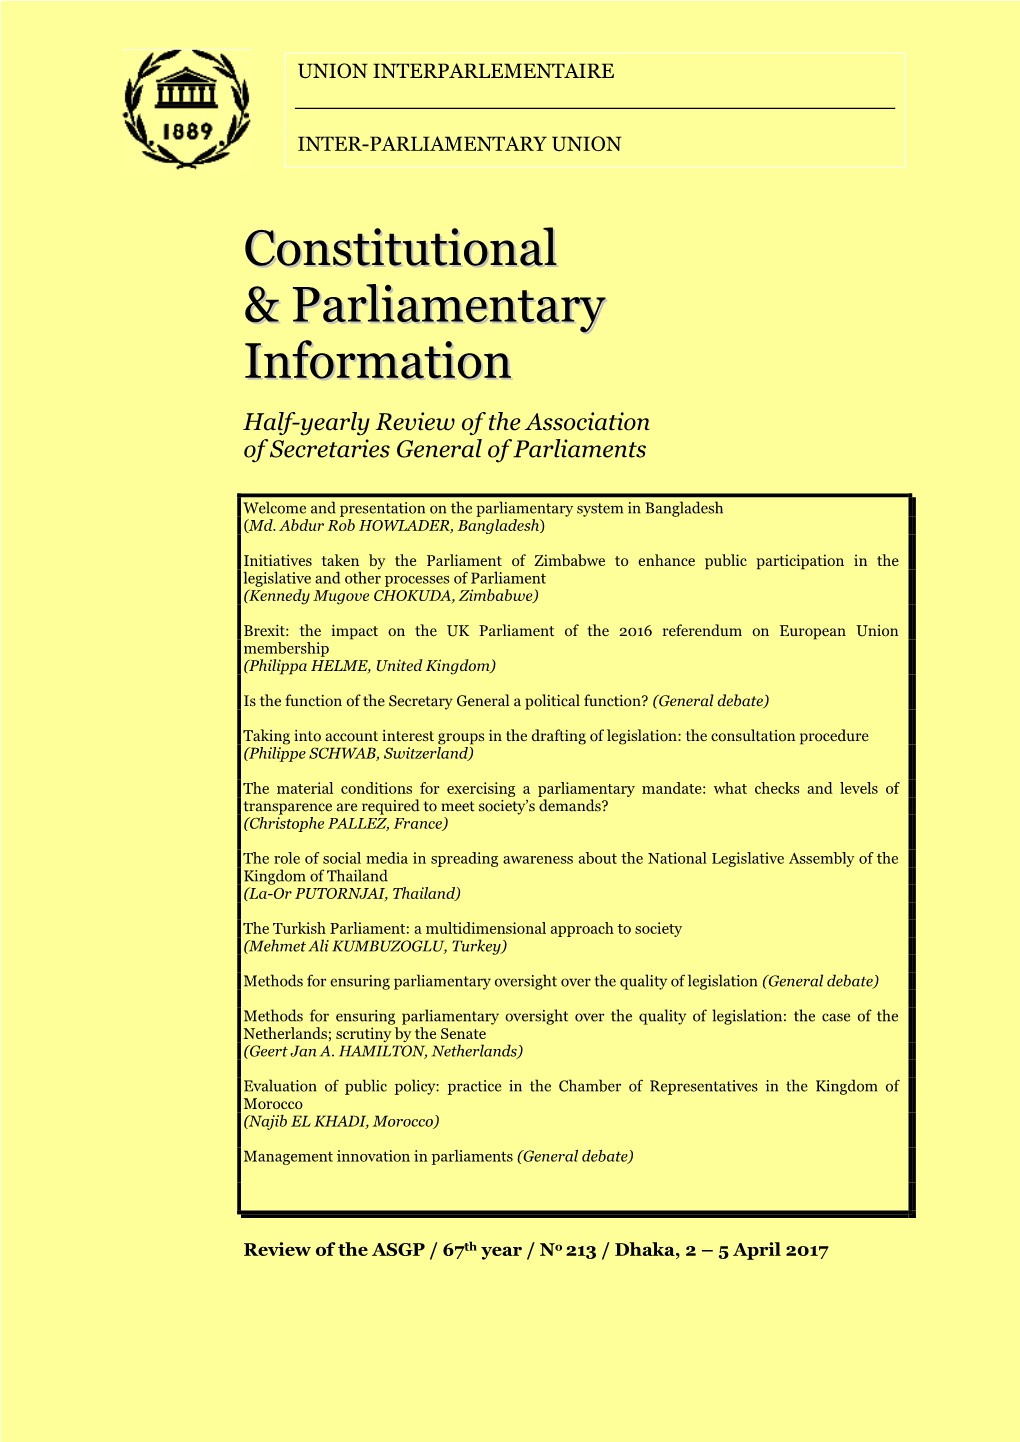 Constitutional & Parliamentary Information